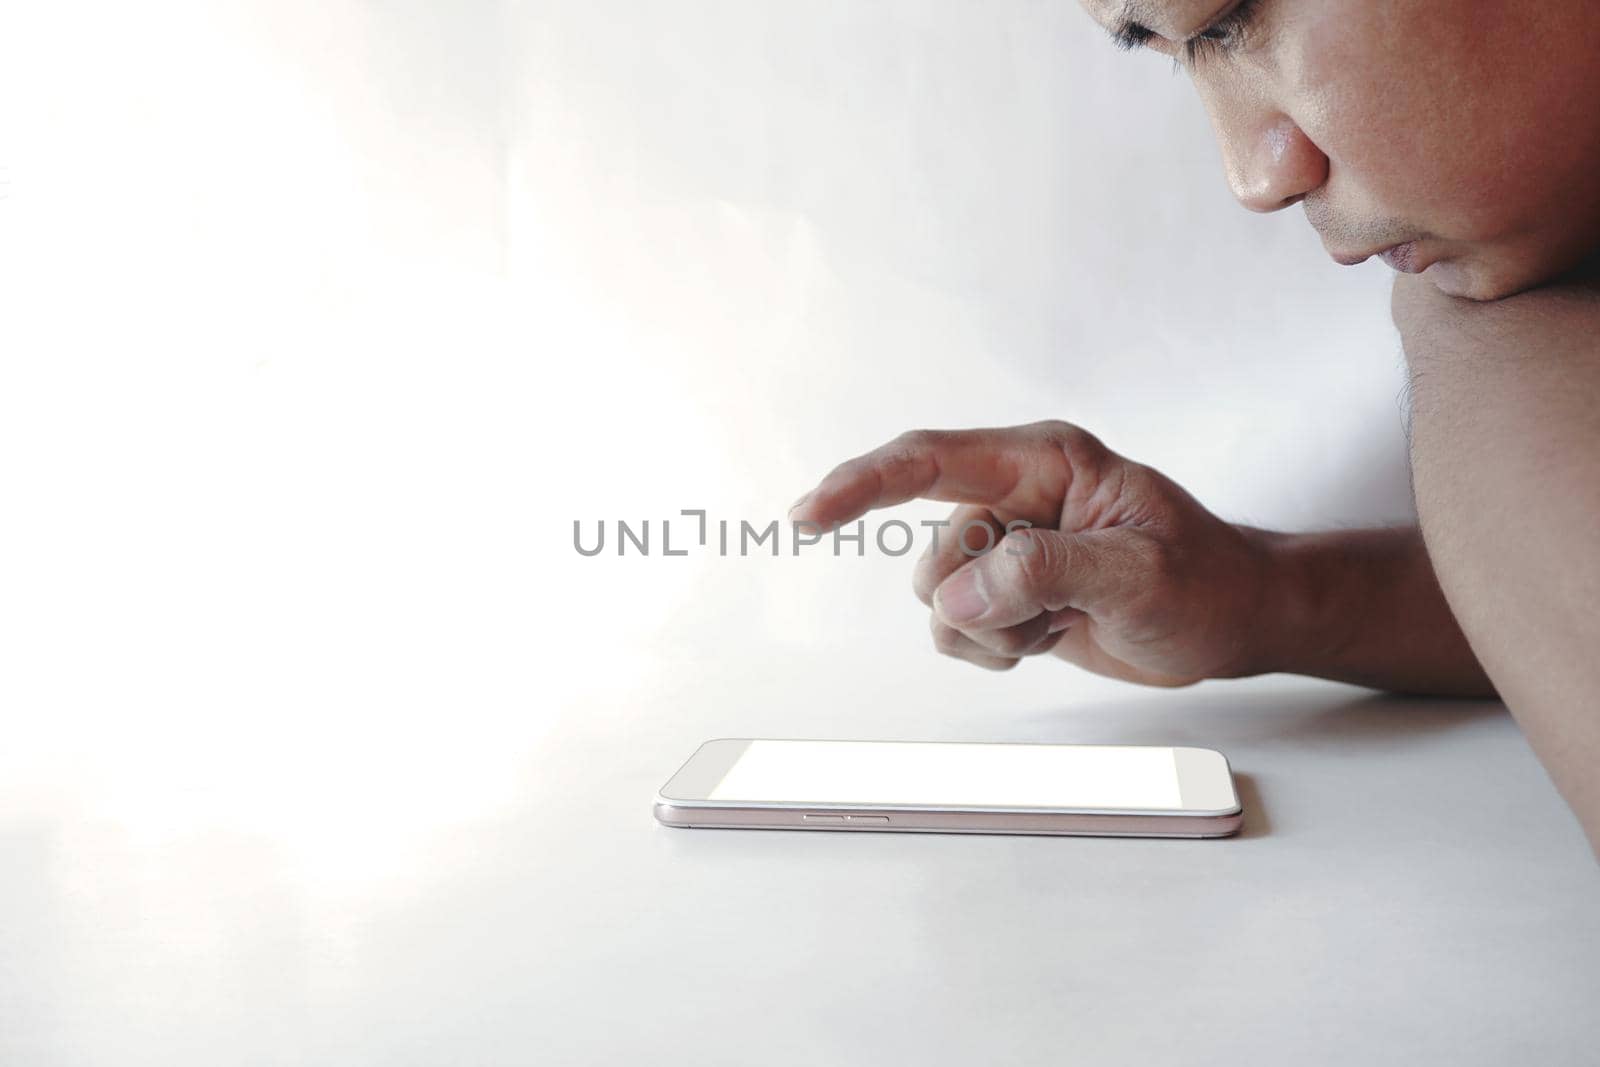 Selective focus image of face male hands using smartphone at home on a white room, searching or social chat networks concept.